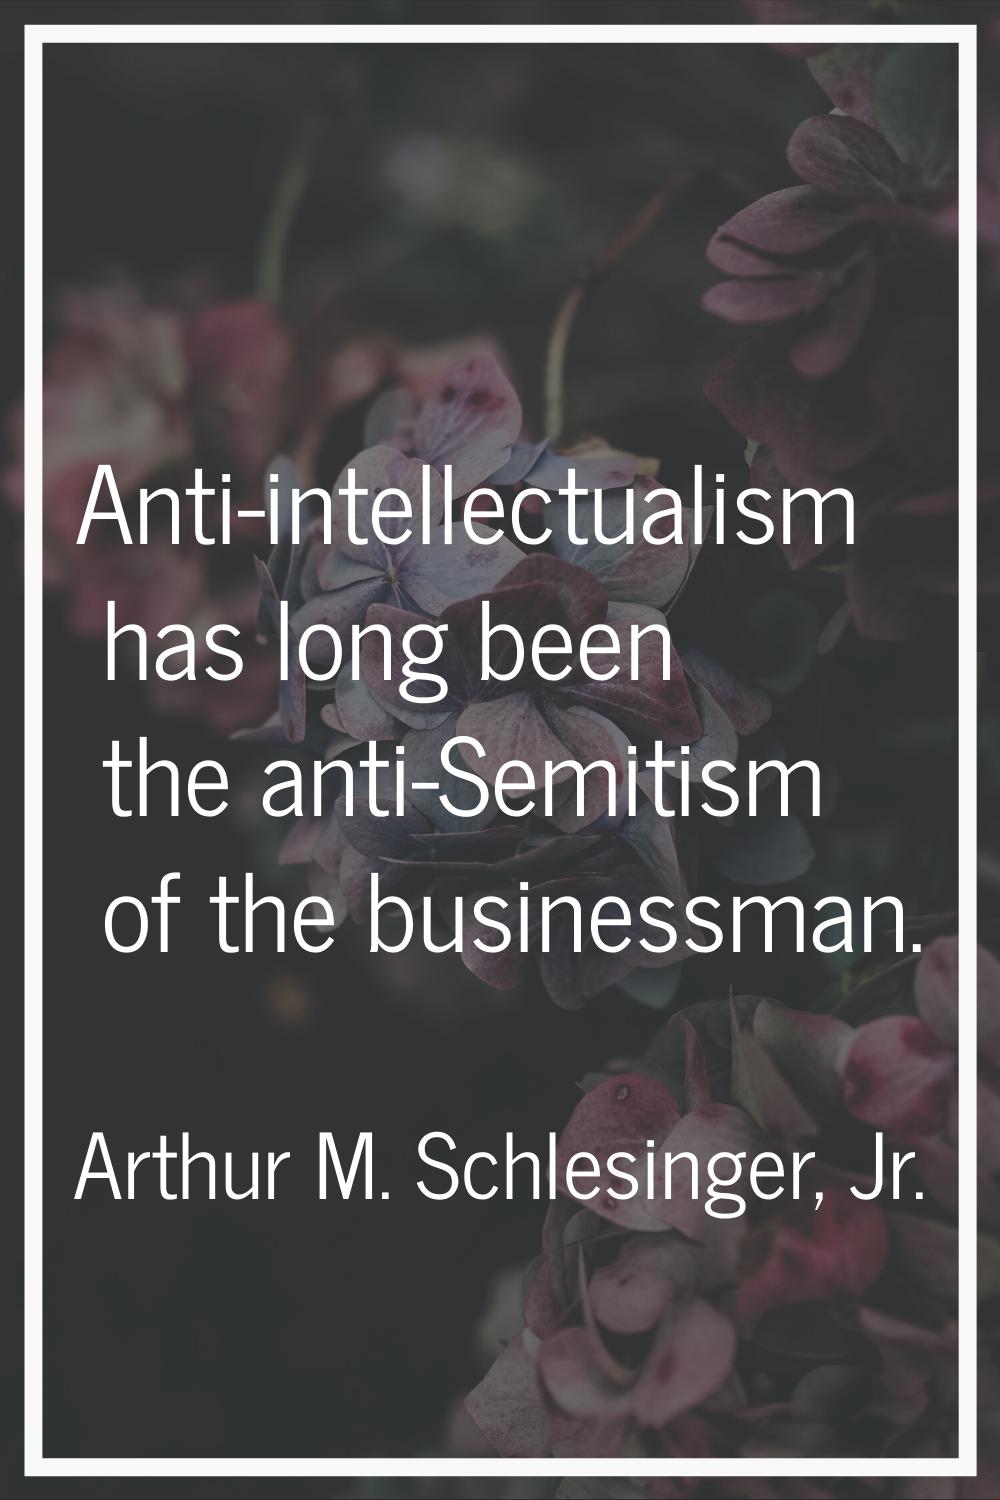 Anti-intellectualism has long been the anti-Semitism of the businessman.